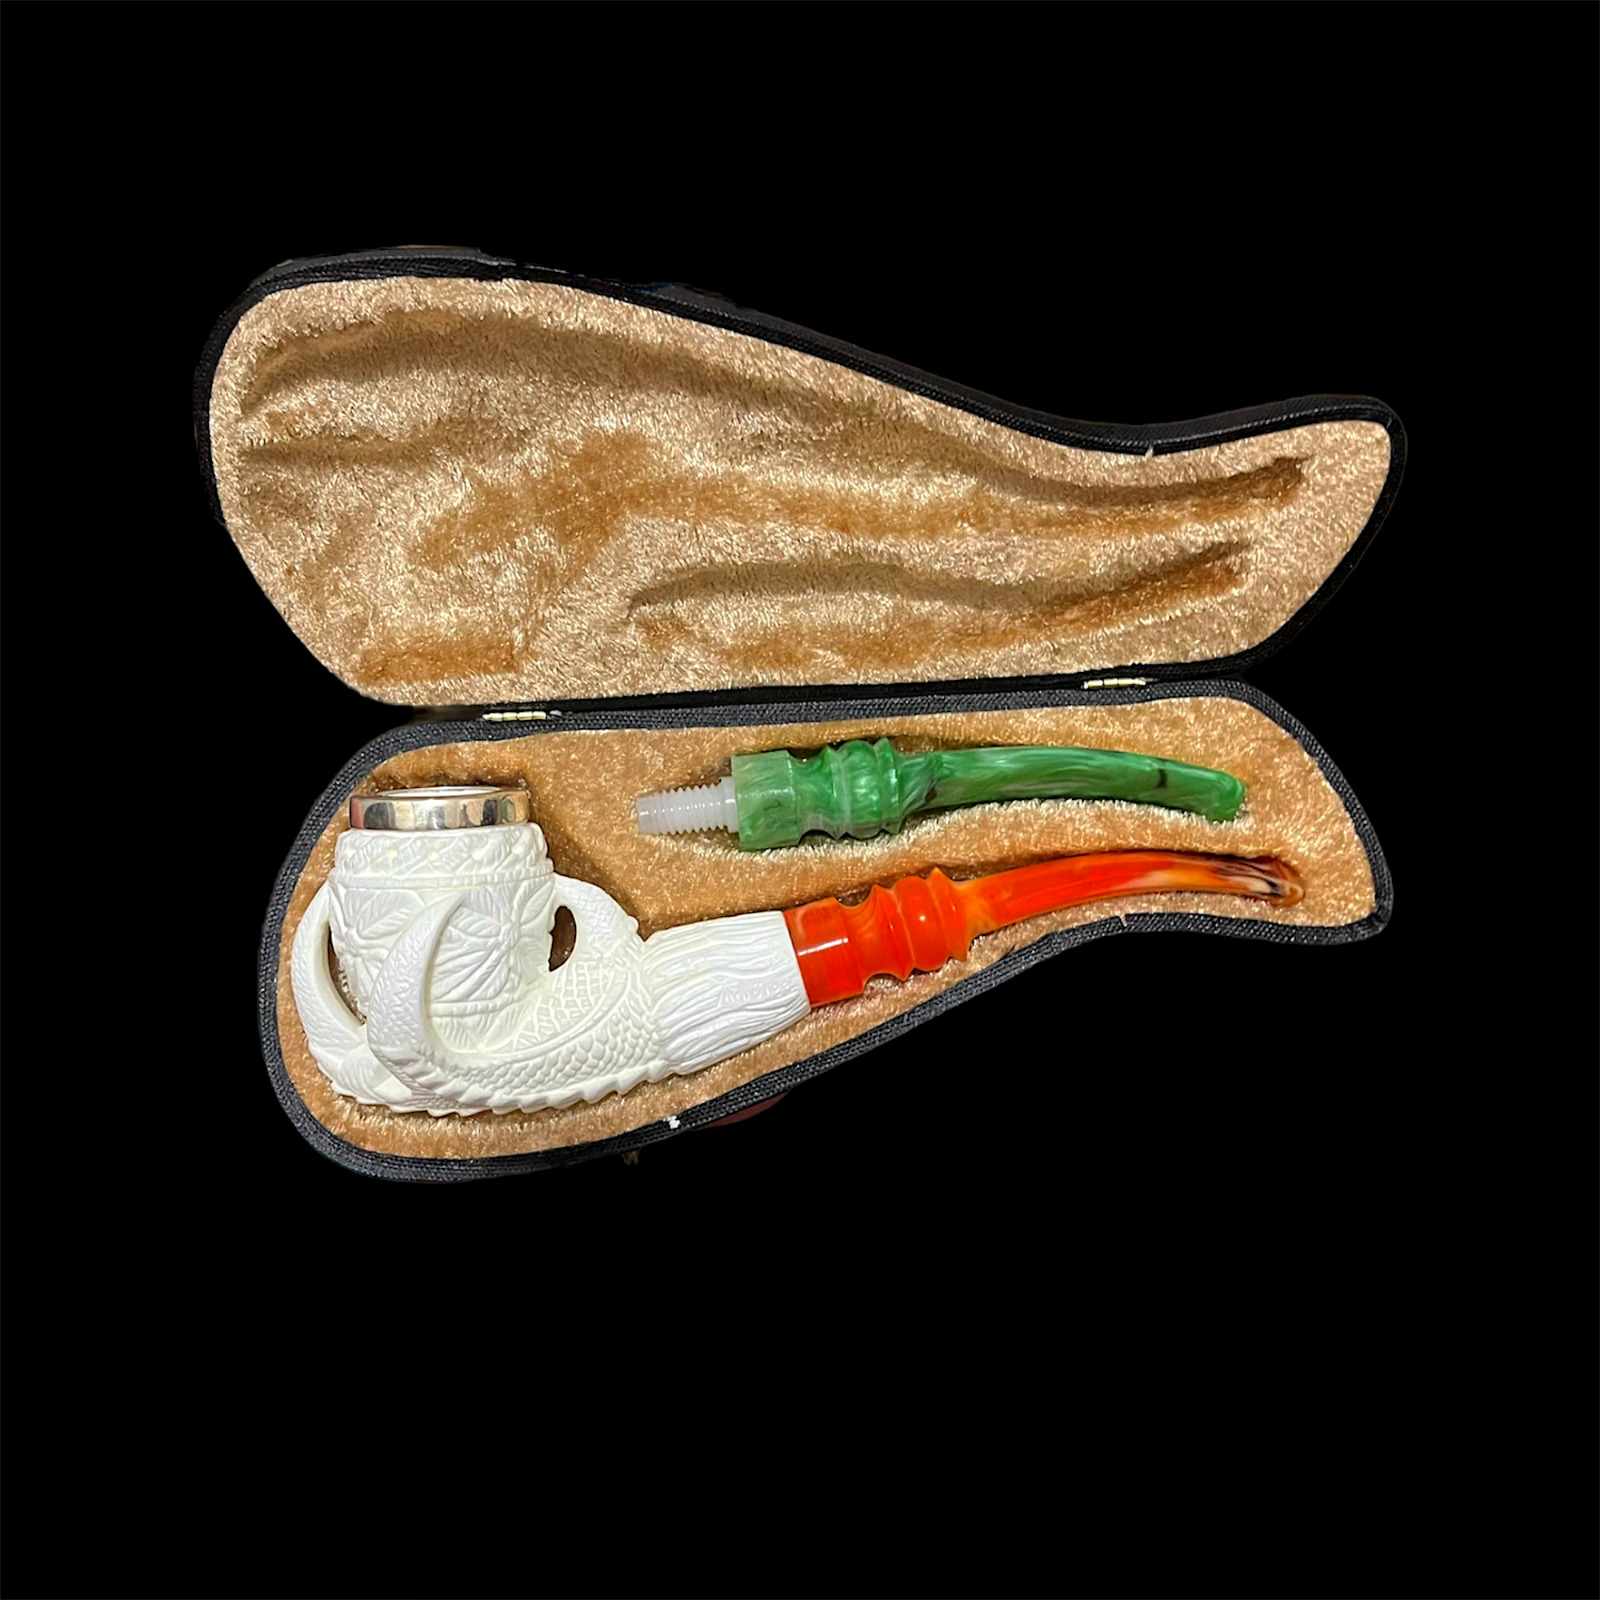 Eagle claw Block Meerschaum Pipe 925 silver smoking tobacco pipe w case MD-375